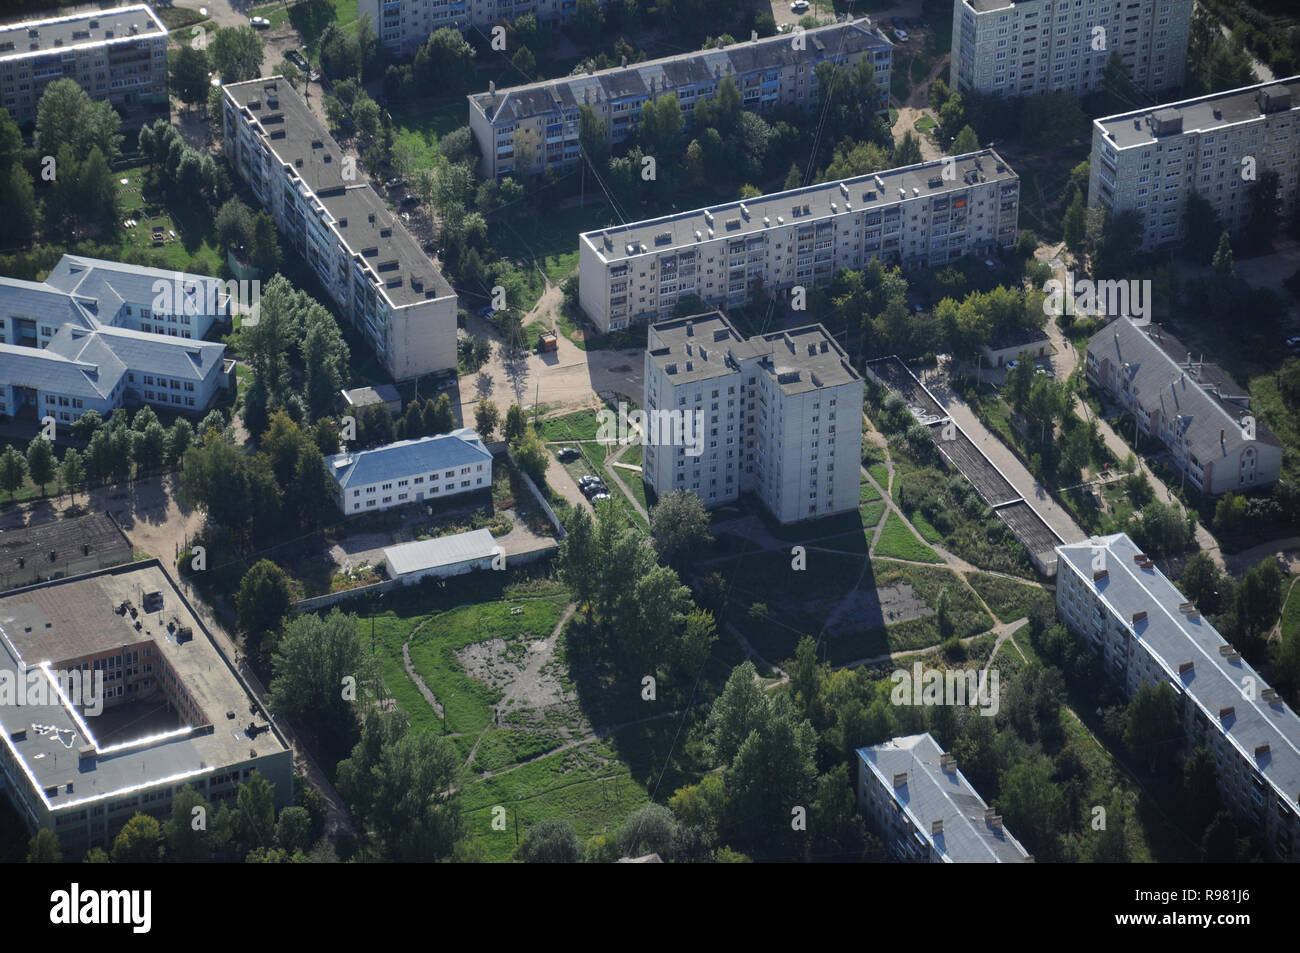 Kovrov, Russia. 17 August 2013. Kovrov town from the air. Area with multi-story buildings Stock Photo